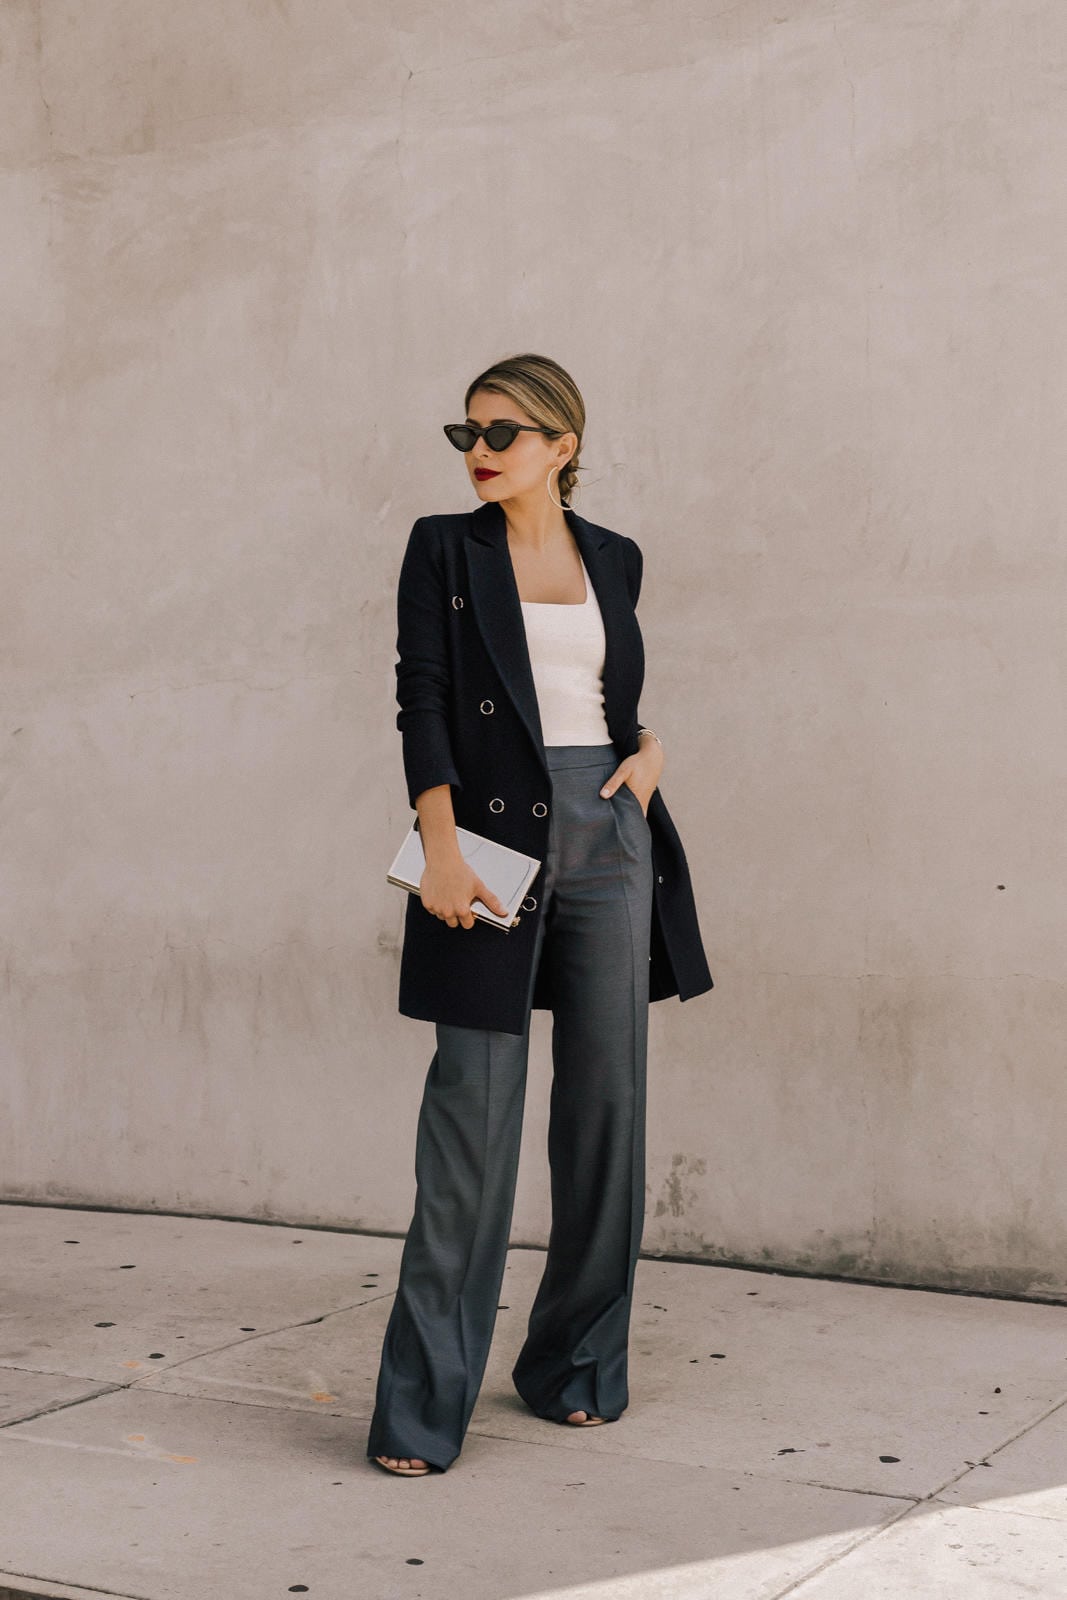 How to Wear the Power Suit , St. Johns Blazer and trousers, Pam Hetlinger outfits | TheGirlFromPanama.com